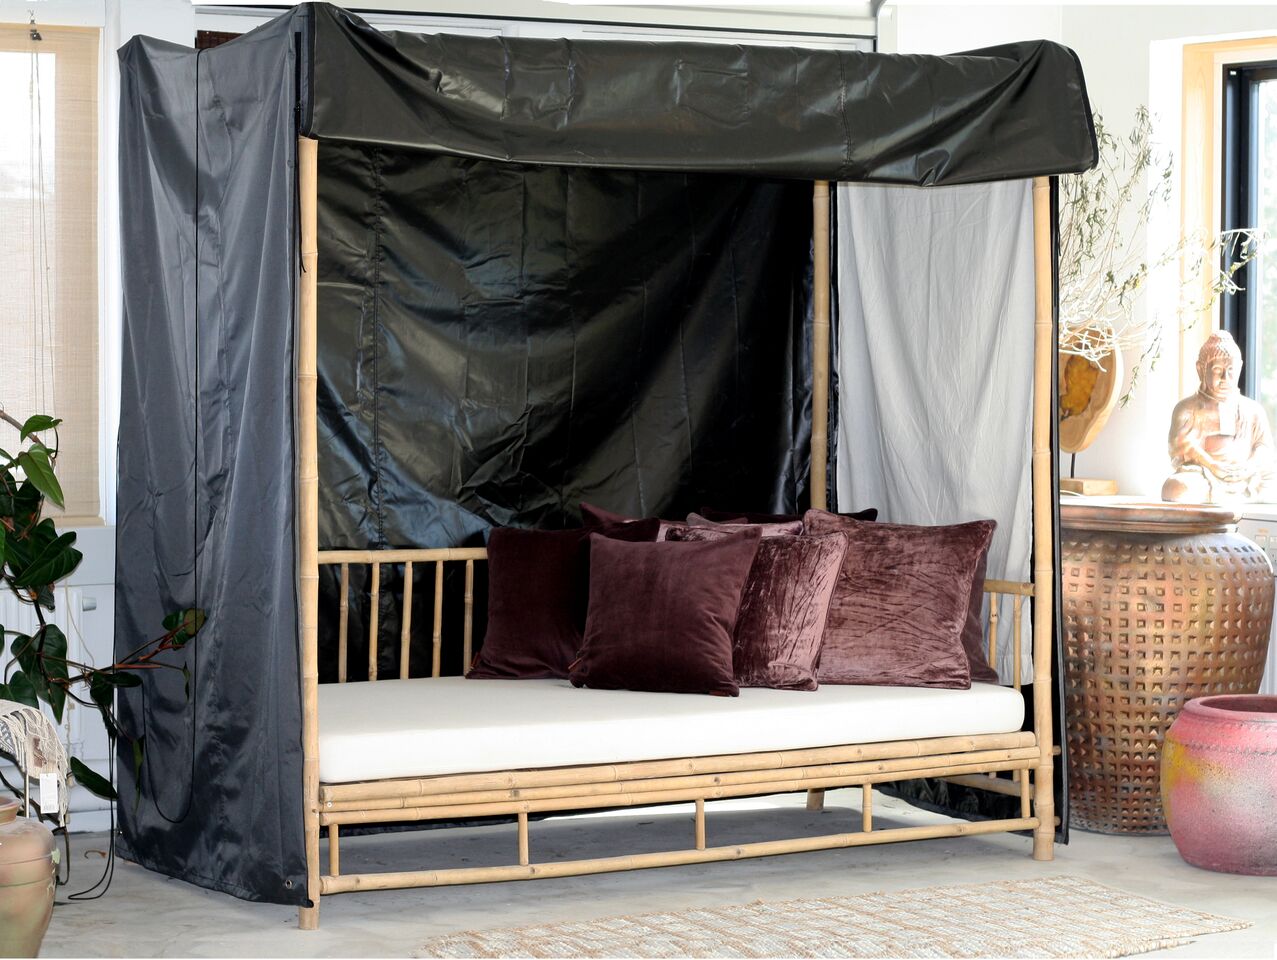 Bambus Daybed with cover - Northbynorth - Køb Bambusmøbler